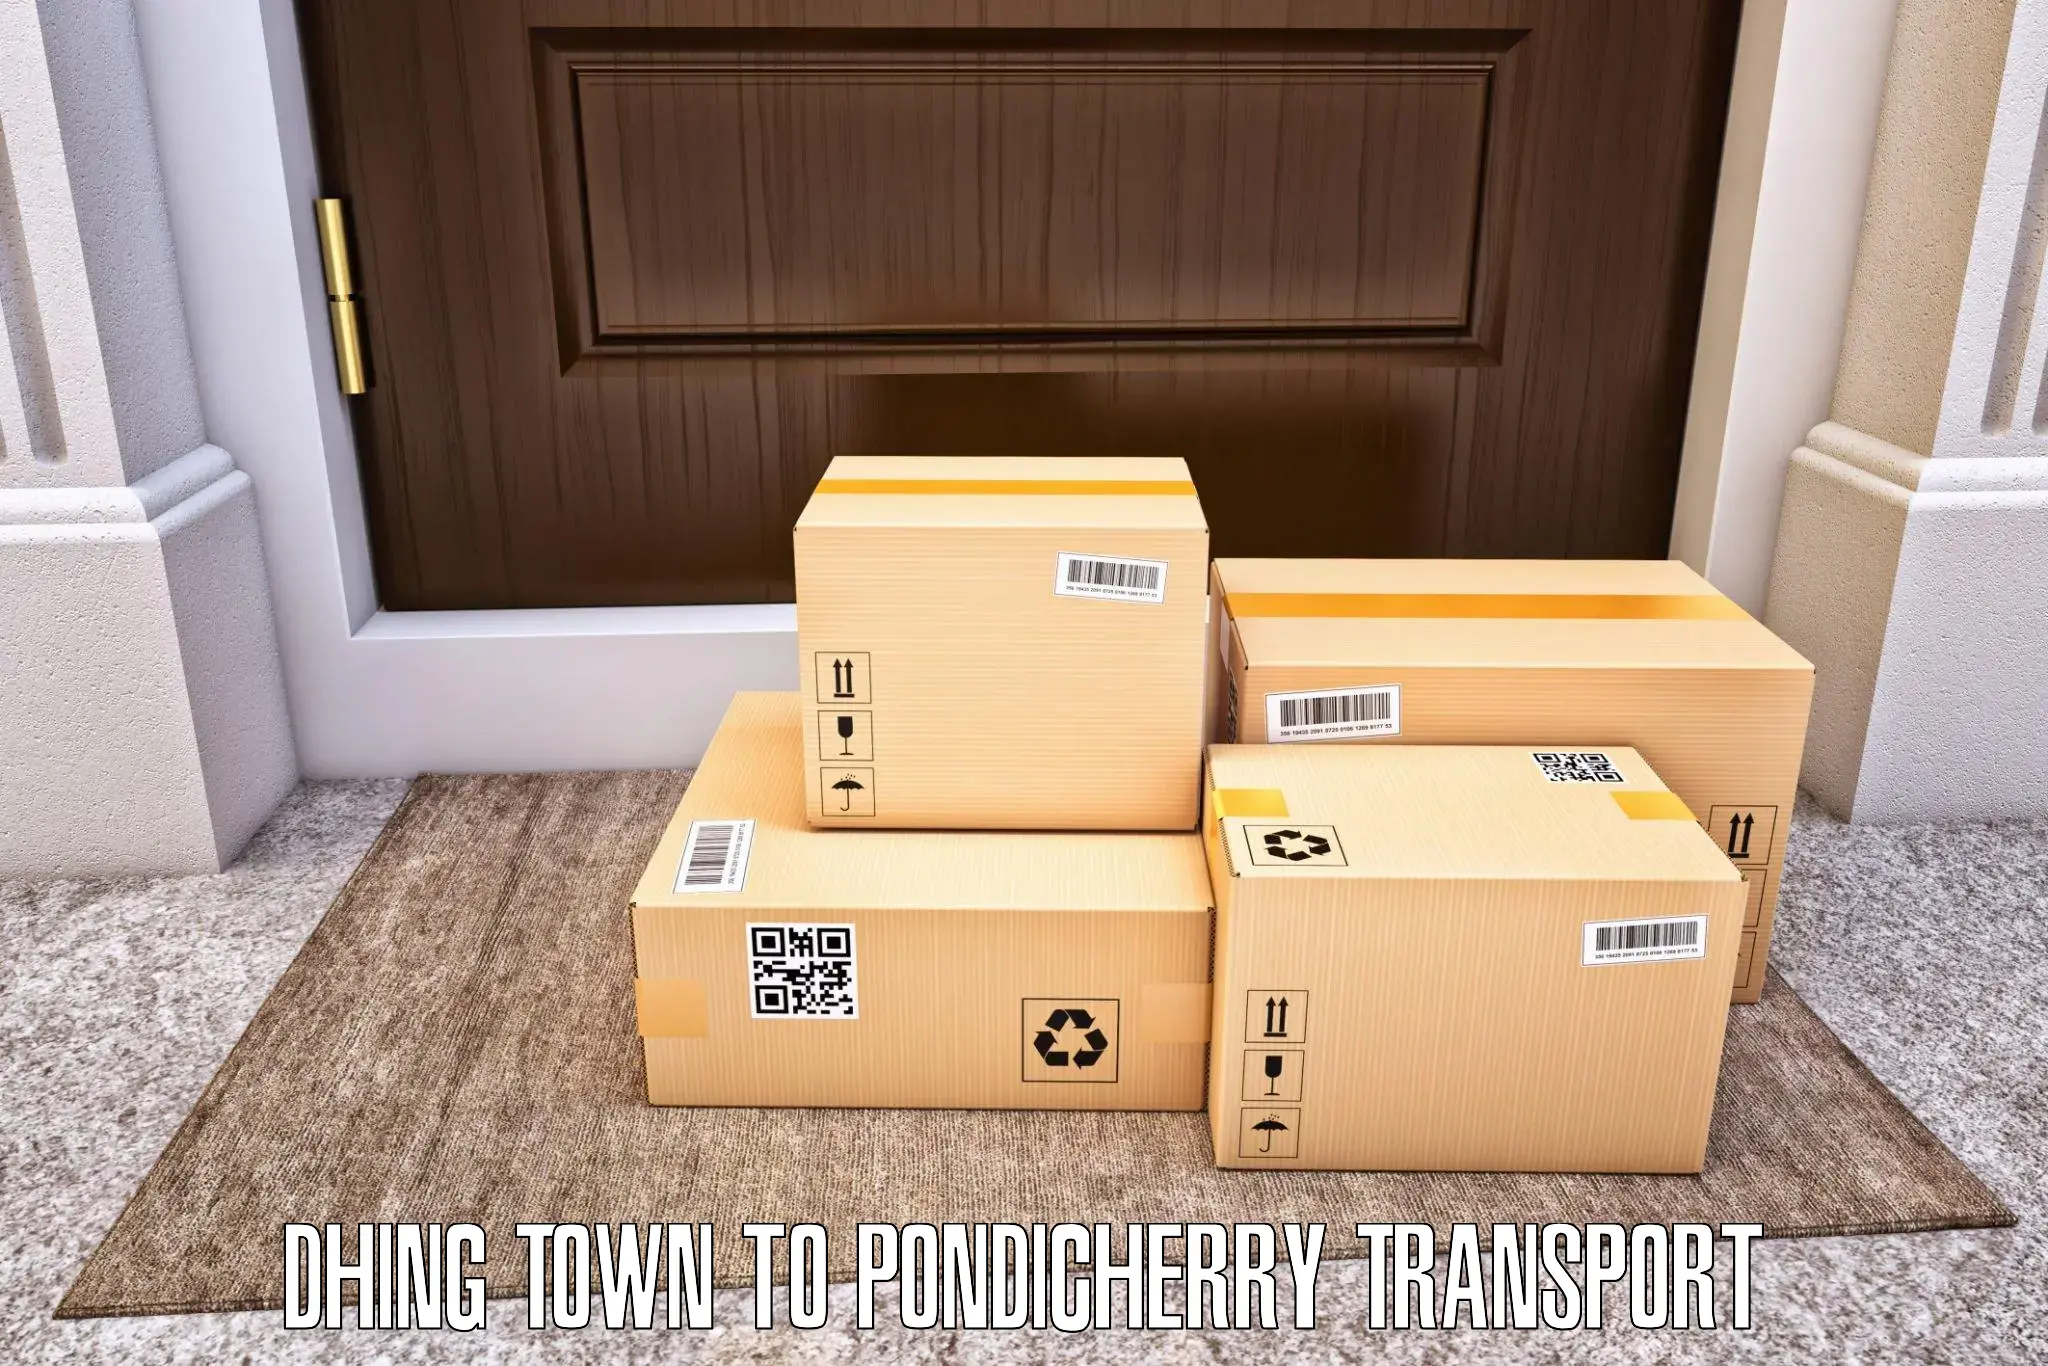 Two wheeler parcel service Dhing Town to Pondicherry University